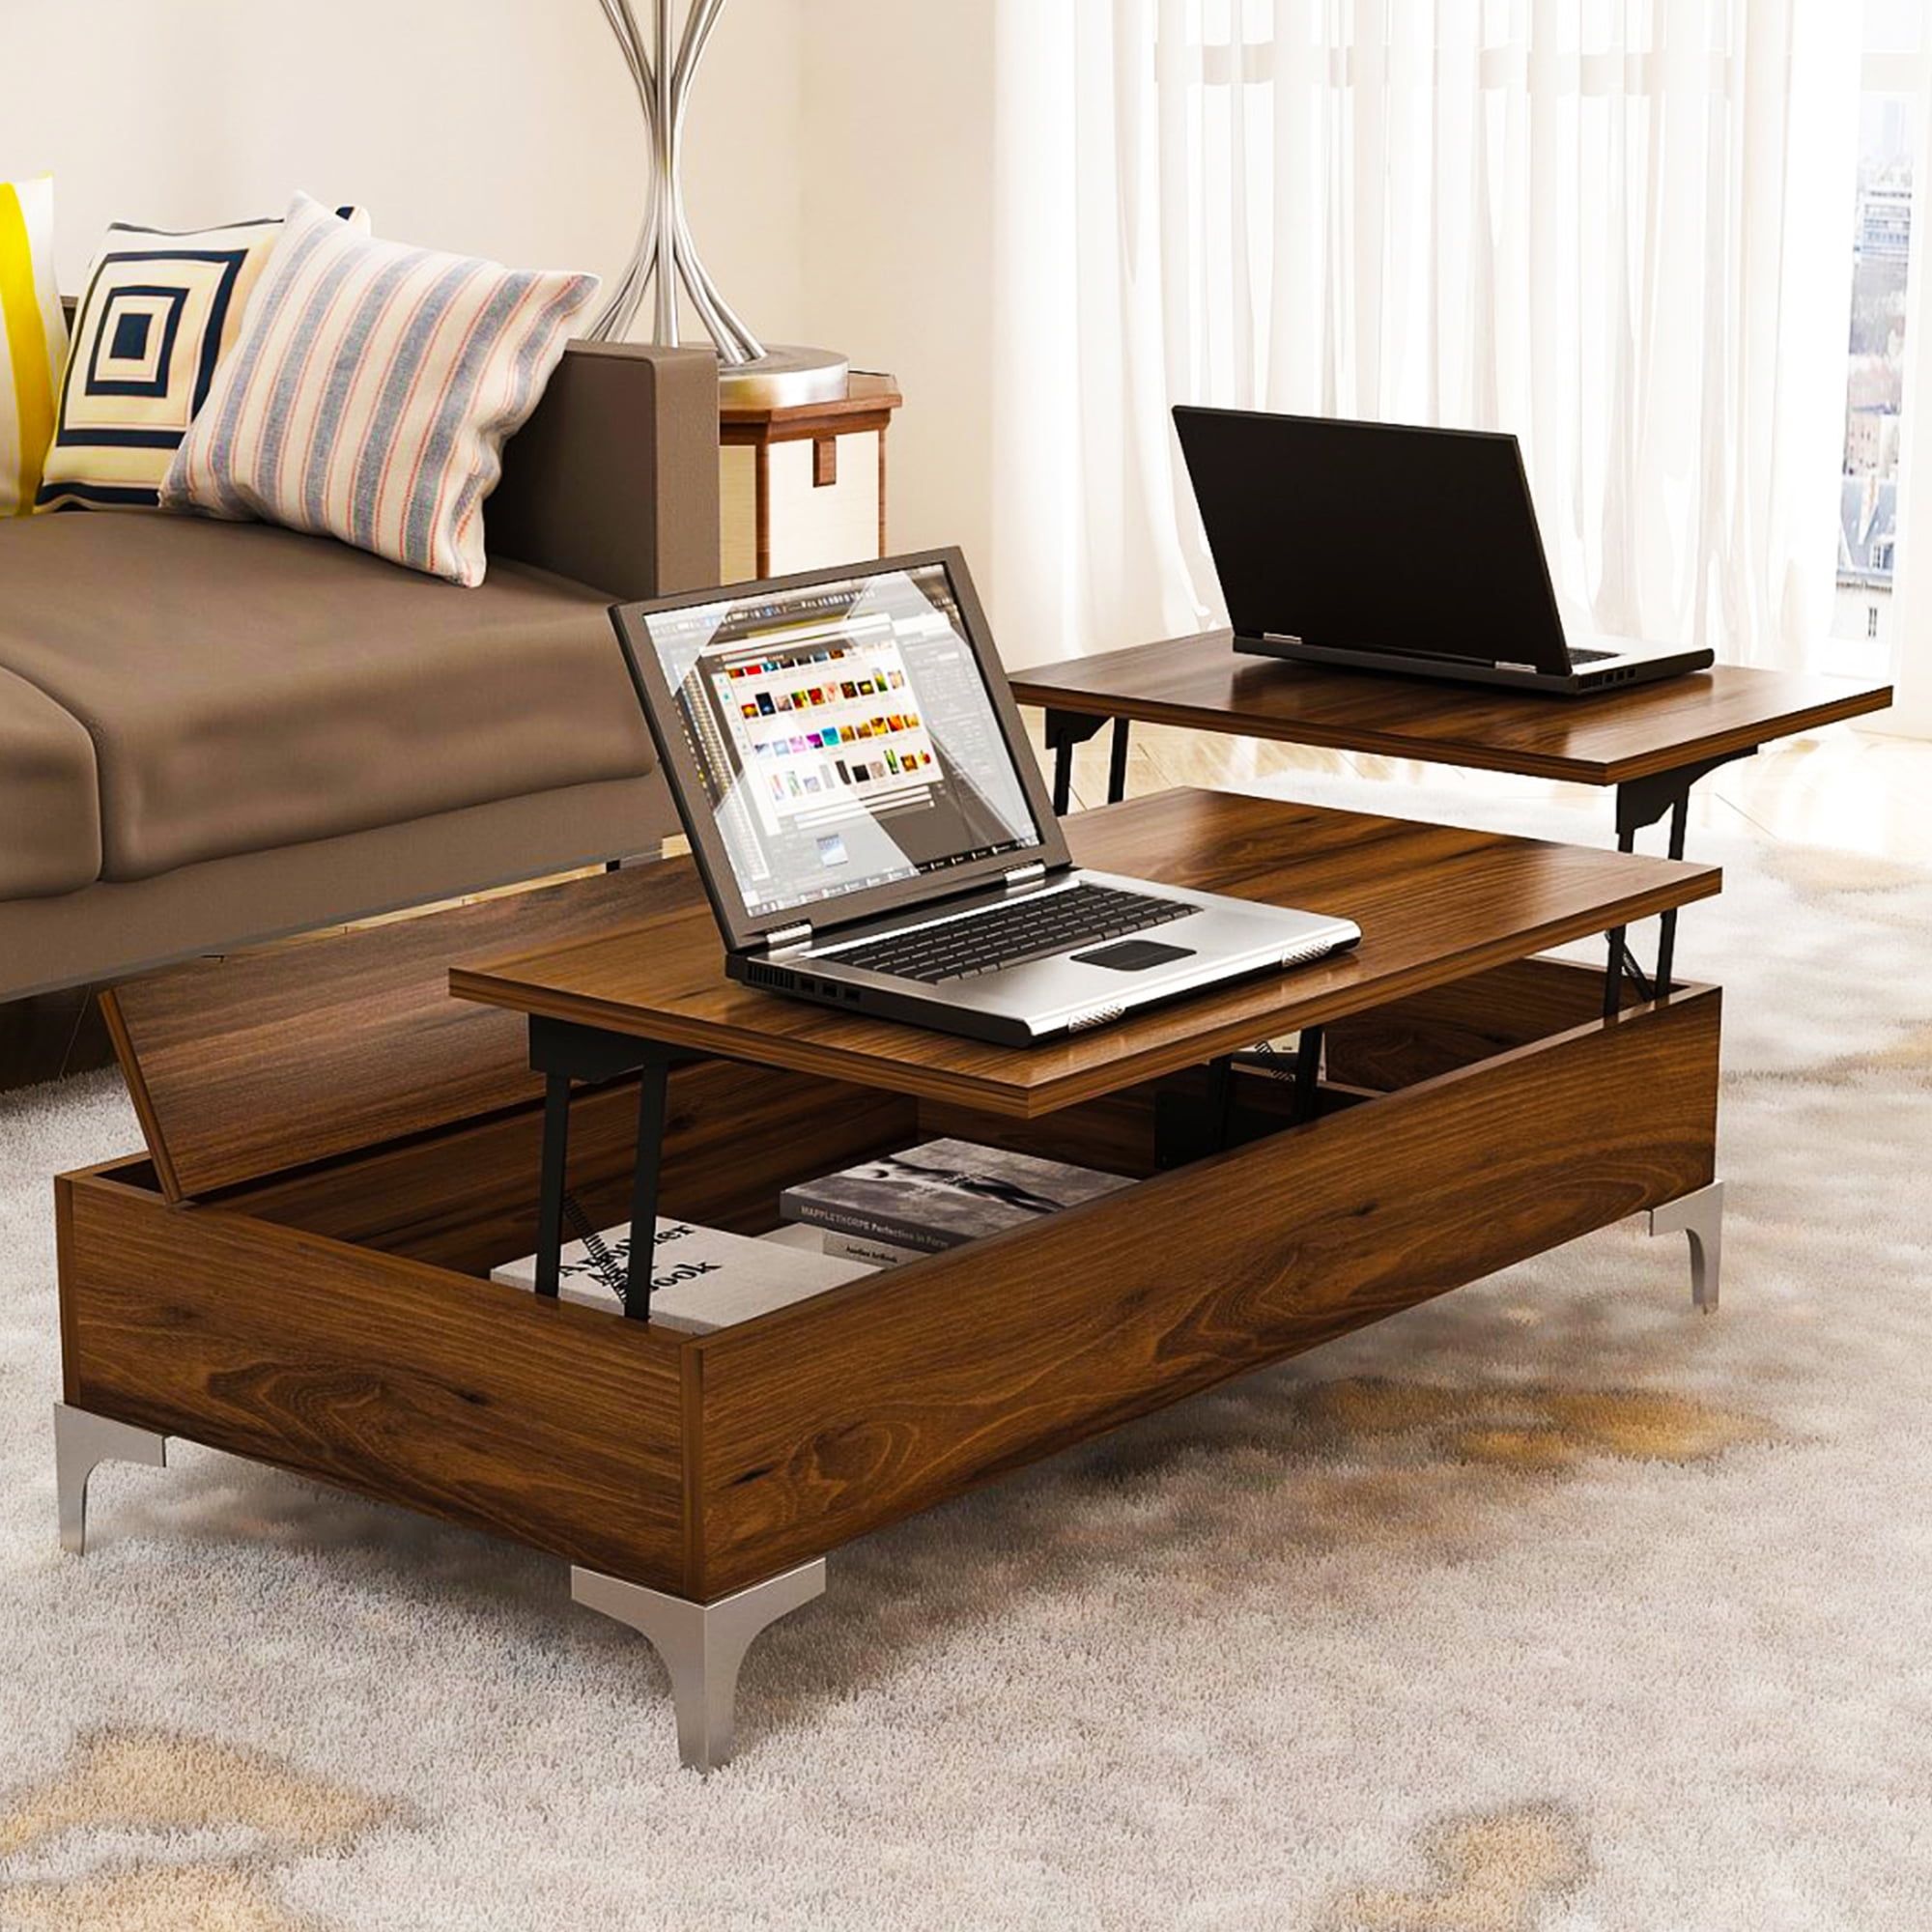 Lift Top Coffee Table, Adjustable Wood Table With Hidden Storage Pertaining To Modern Wooden Lift Top Tables (View 13 of 15)